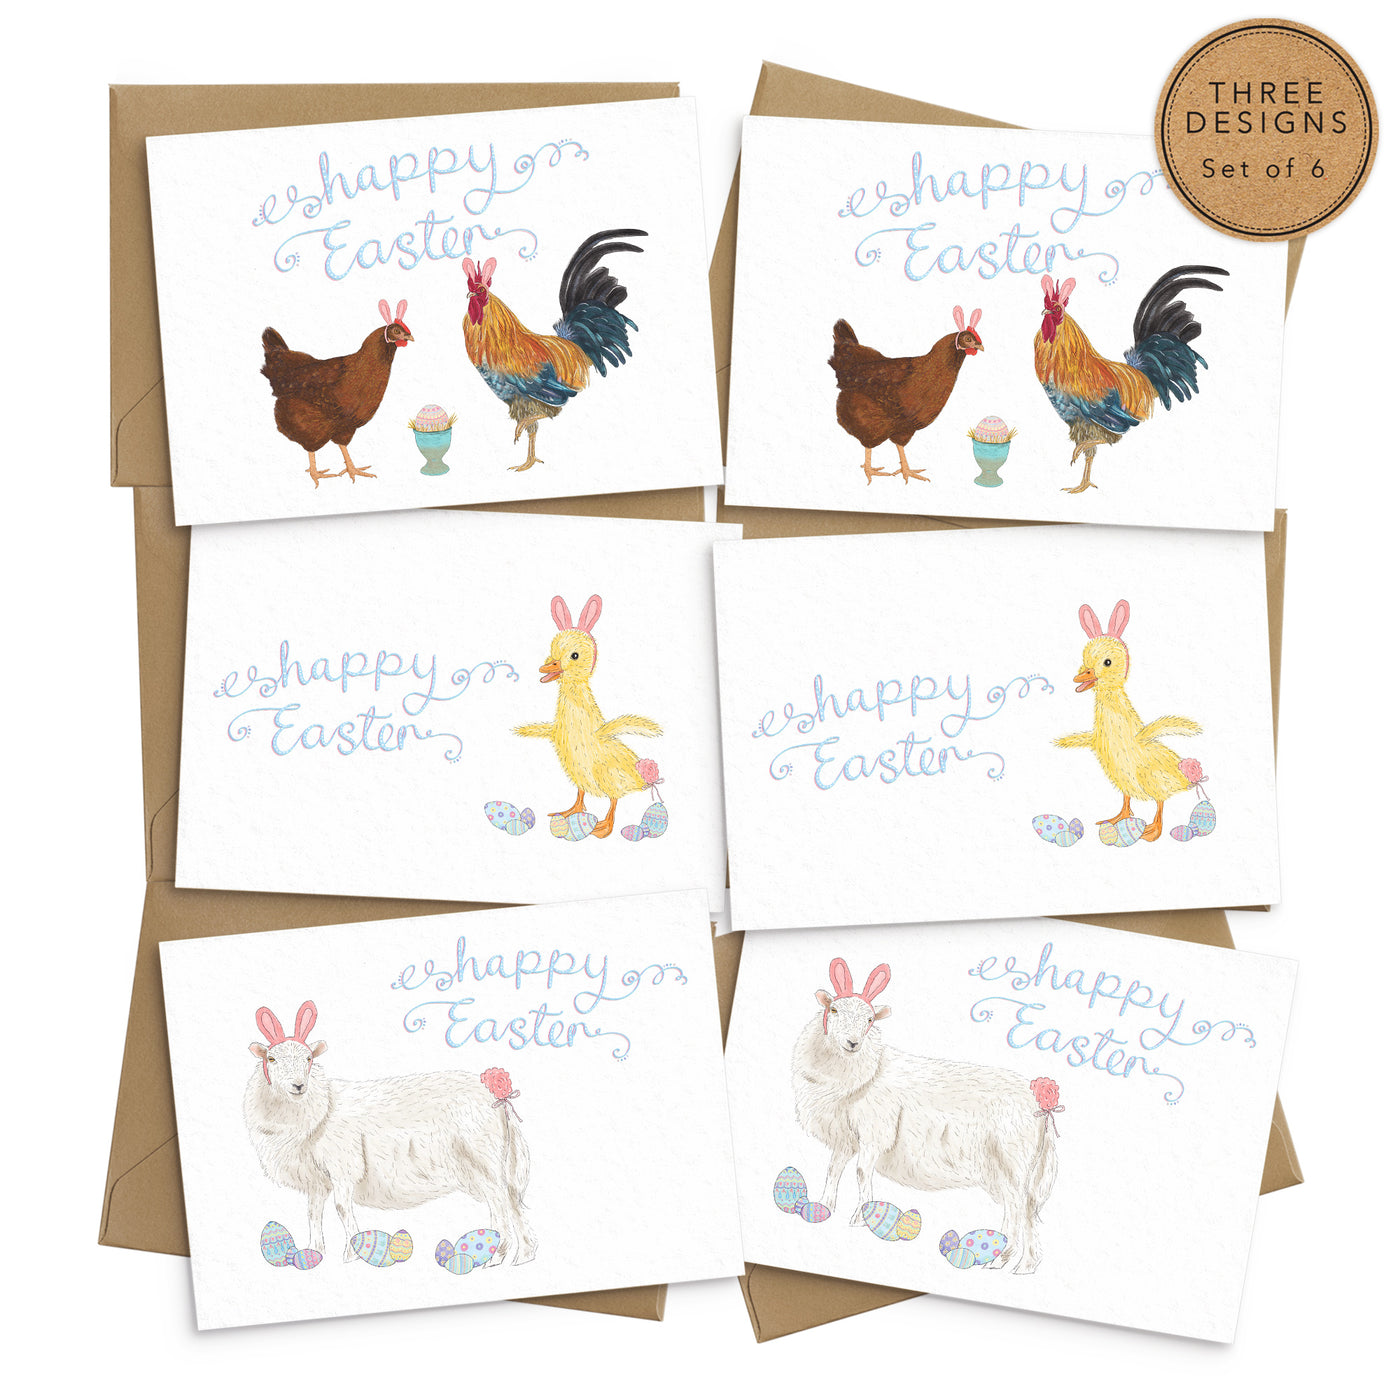 Pack of 6 Easter Greetings Cards with 6 mixed designs. Including a sheep, a duckling and a hen and cockerel with an egg. All are dressed as the Easter Bunny with pink bunny ears and tails and an assortment of pastel patterns easter eggs are scattered around. Blue scripted text reads 'happy easter'. A sticker on the photo reads 'three designs-set of 6'. Handmade greetings cards by Poppins and Co.